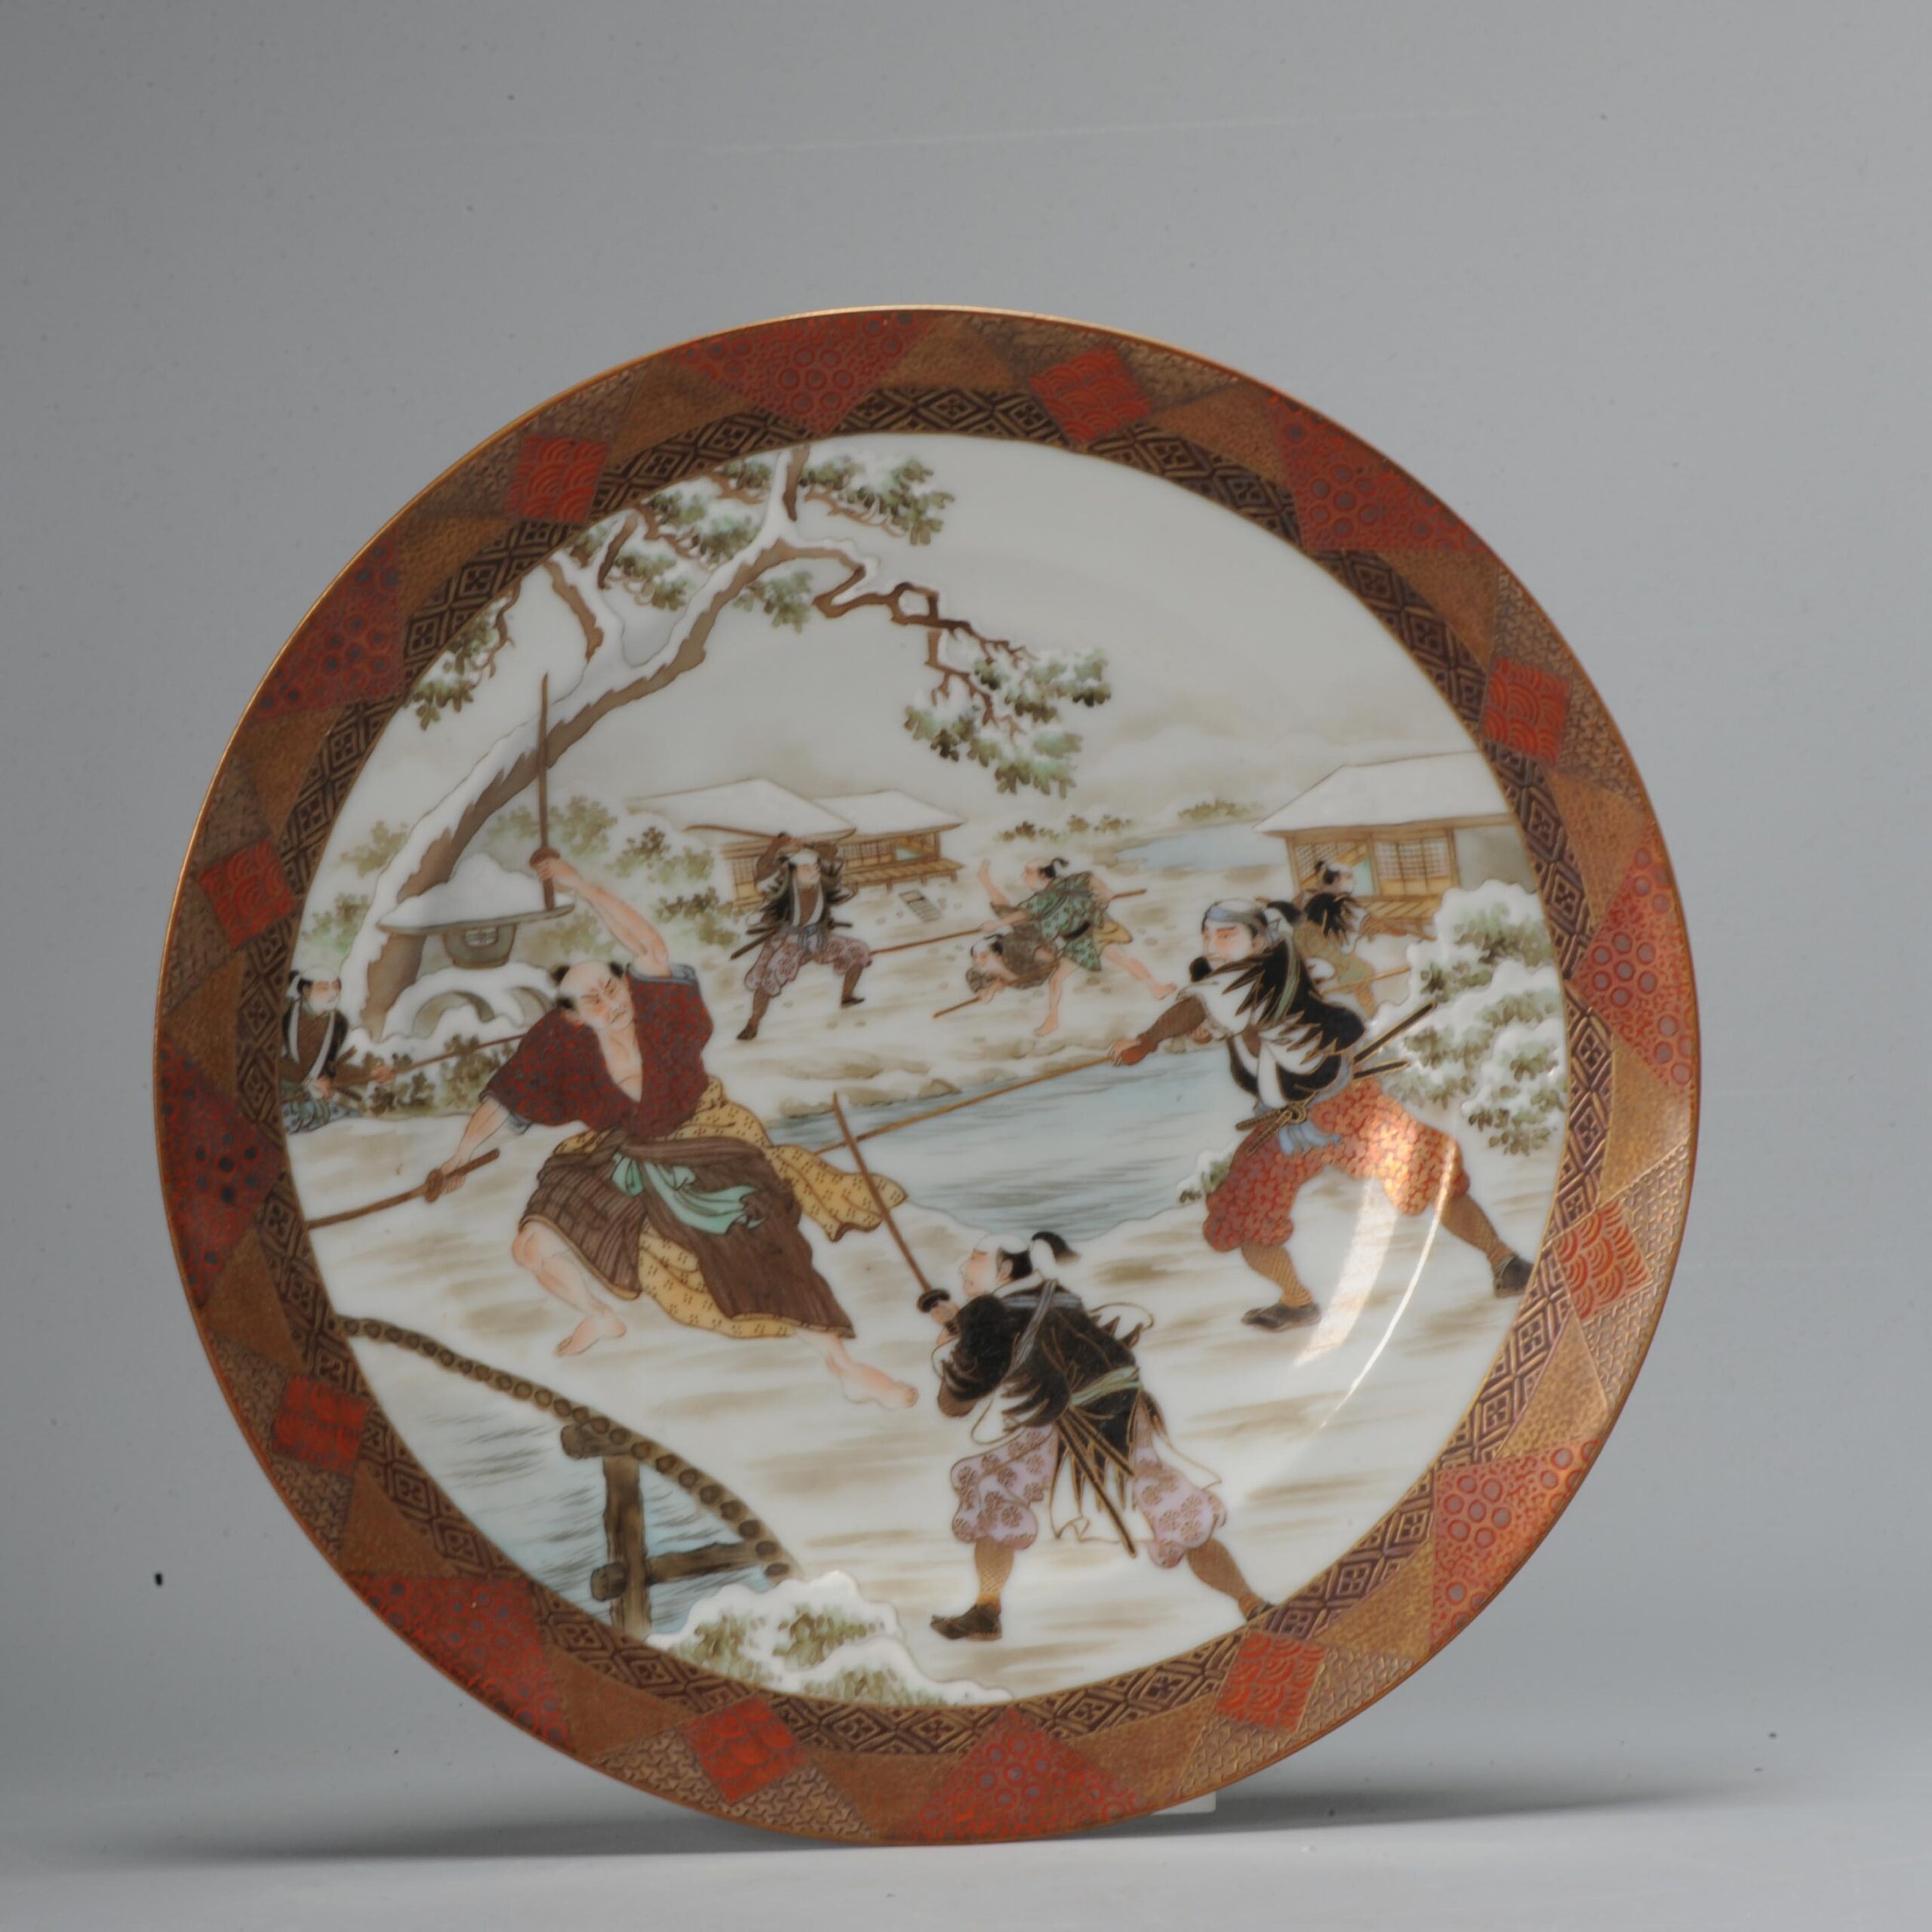 Antique Japanese Porcelain Dish with Warriors Top quality work Japan Marked Base